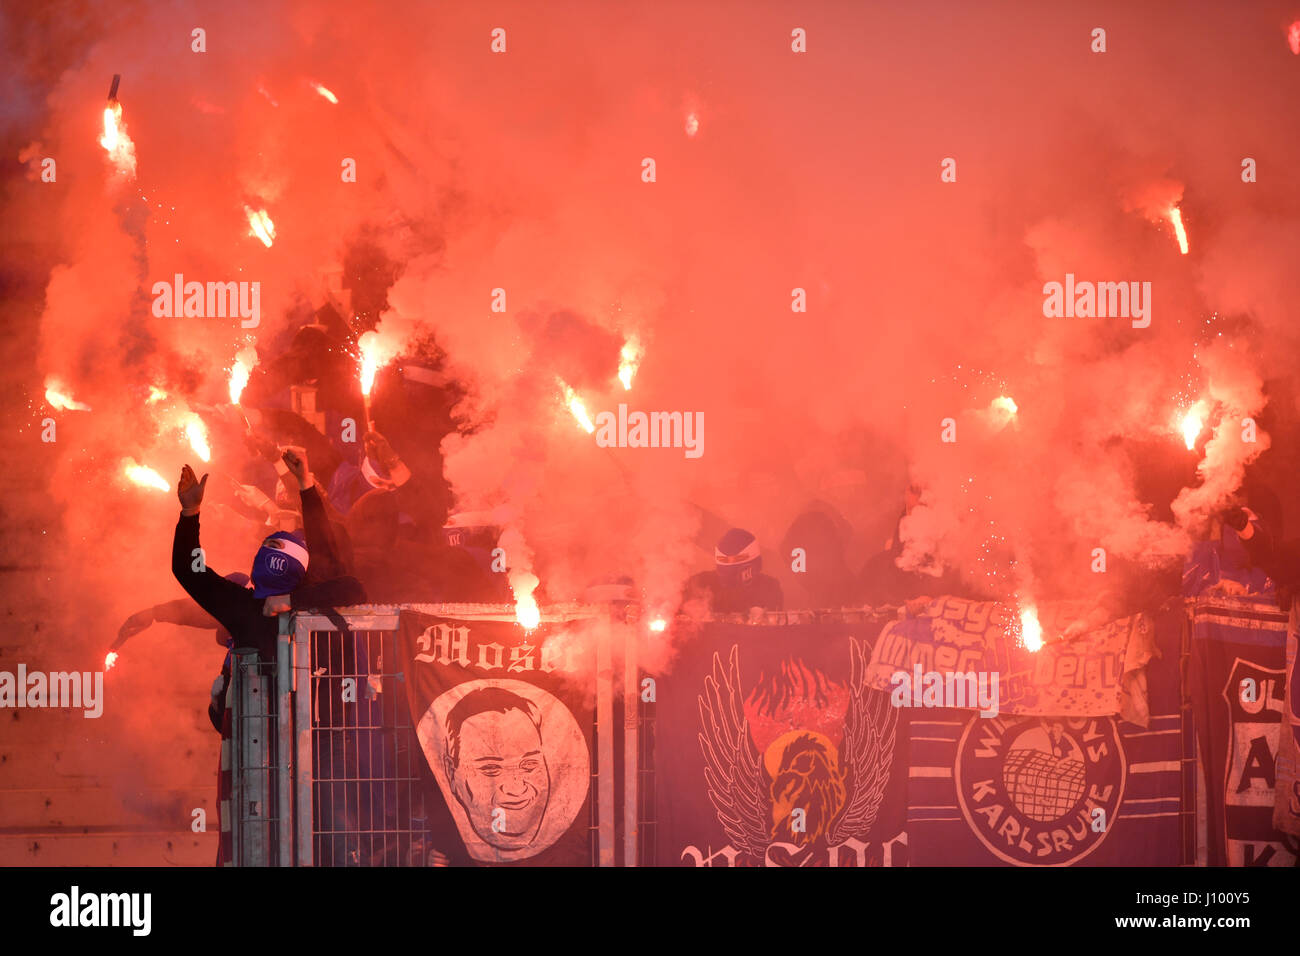 Radical fans at soccer match, hooded hooligans with Bengal light, pyrotechnics, fan section KSC Karlsruher SC Stock Photo